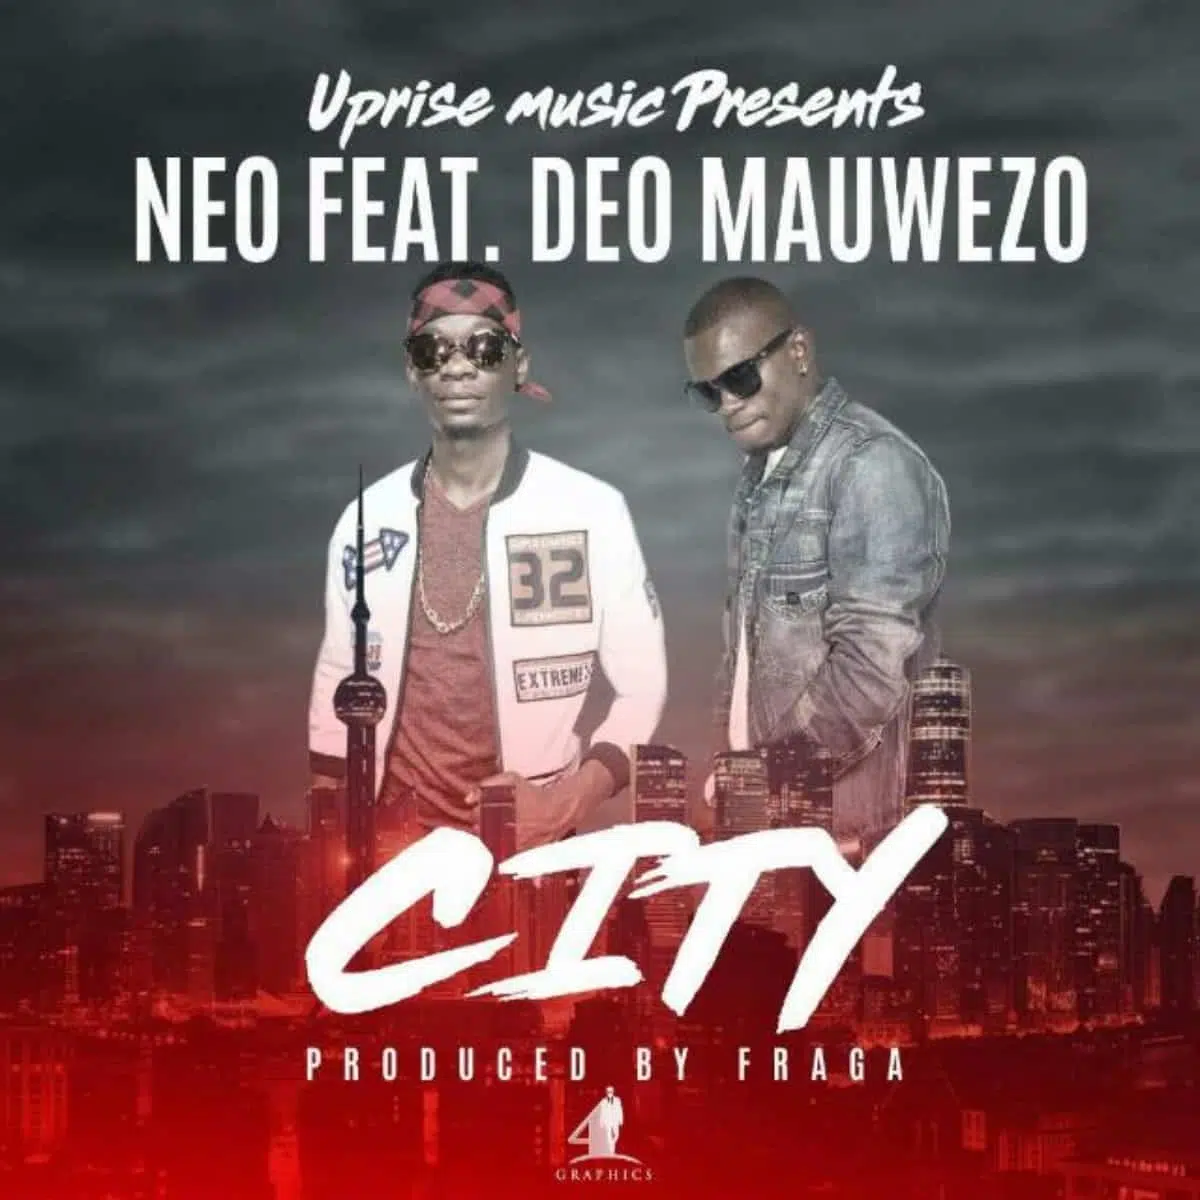 DOWNLOAD: Neo Ft Deo Mauwezo – “City” Mp3